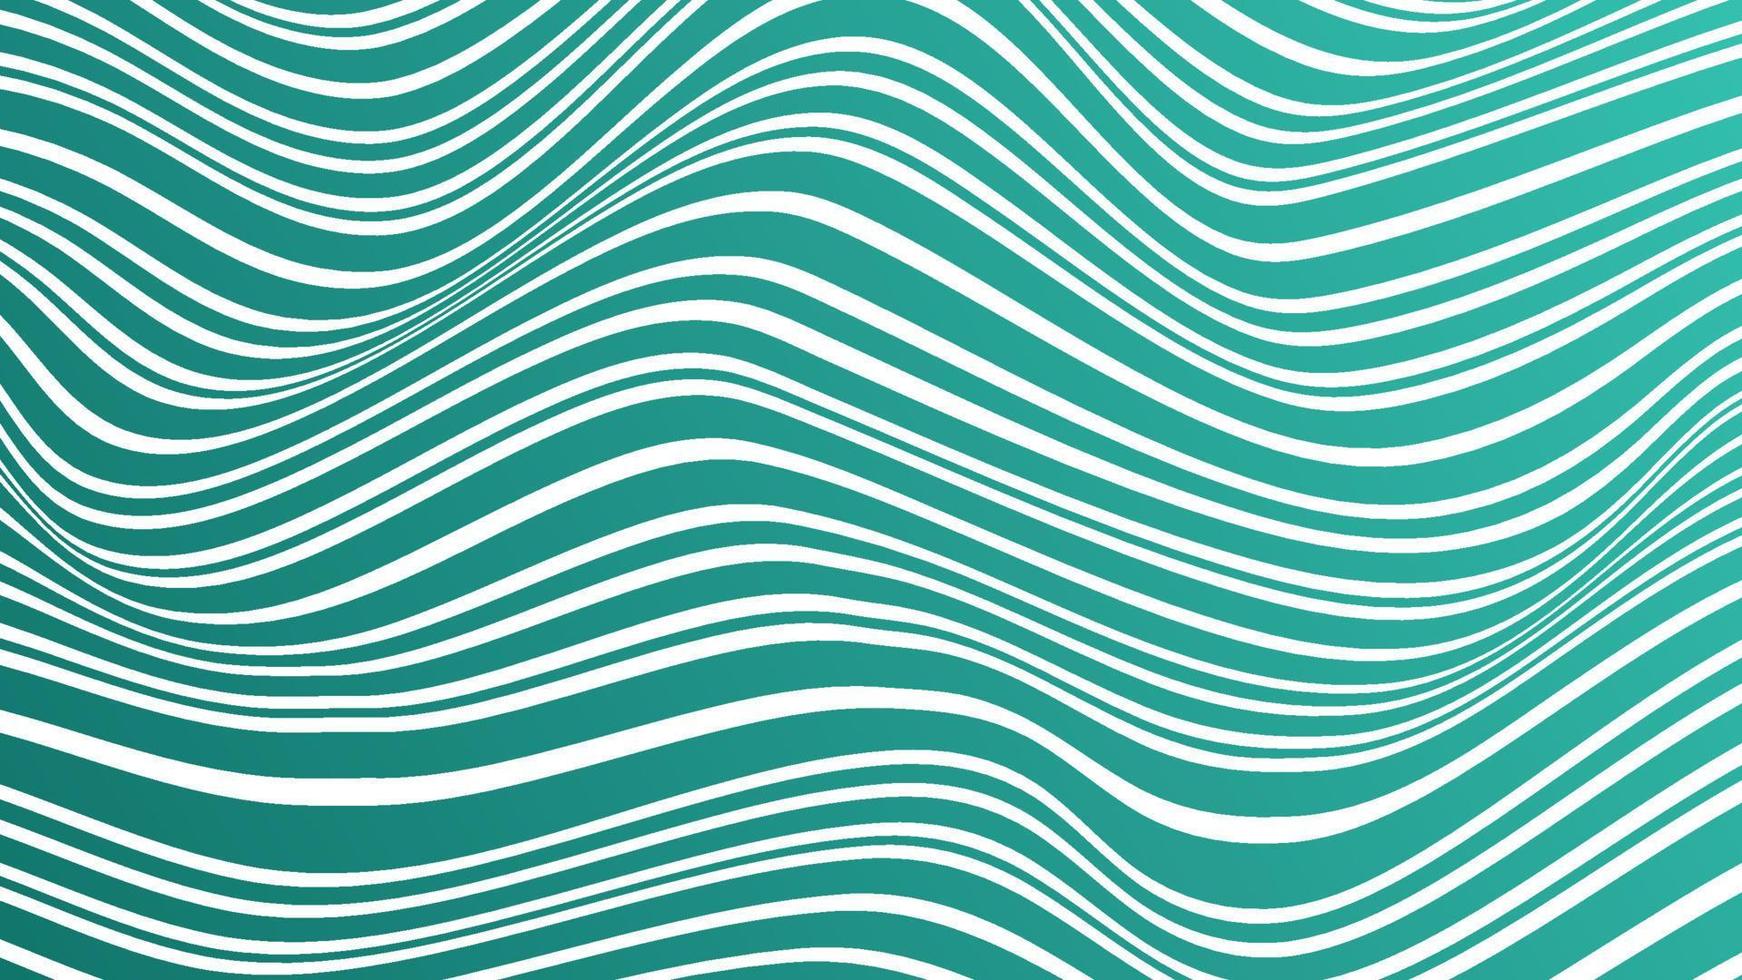 Abstract zig zag line wave background vector